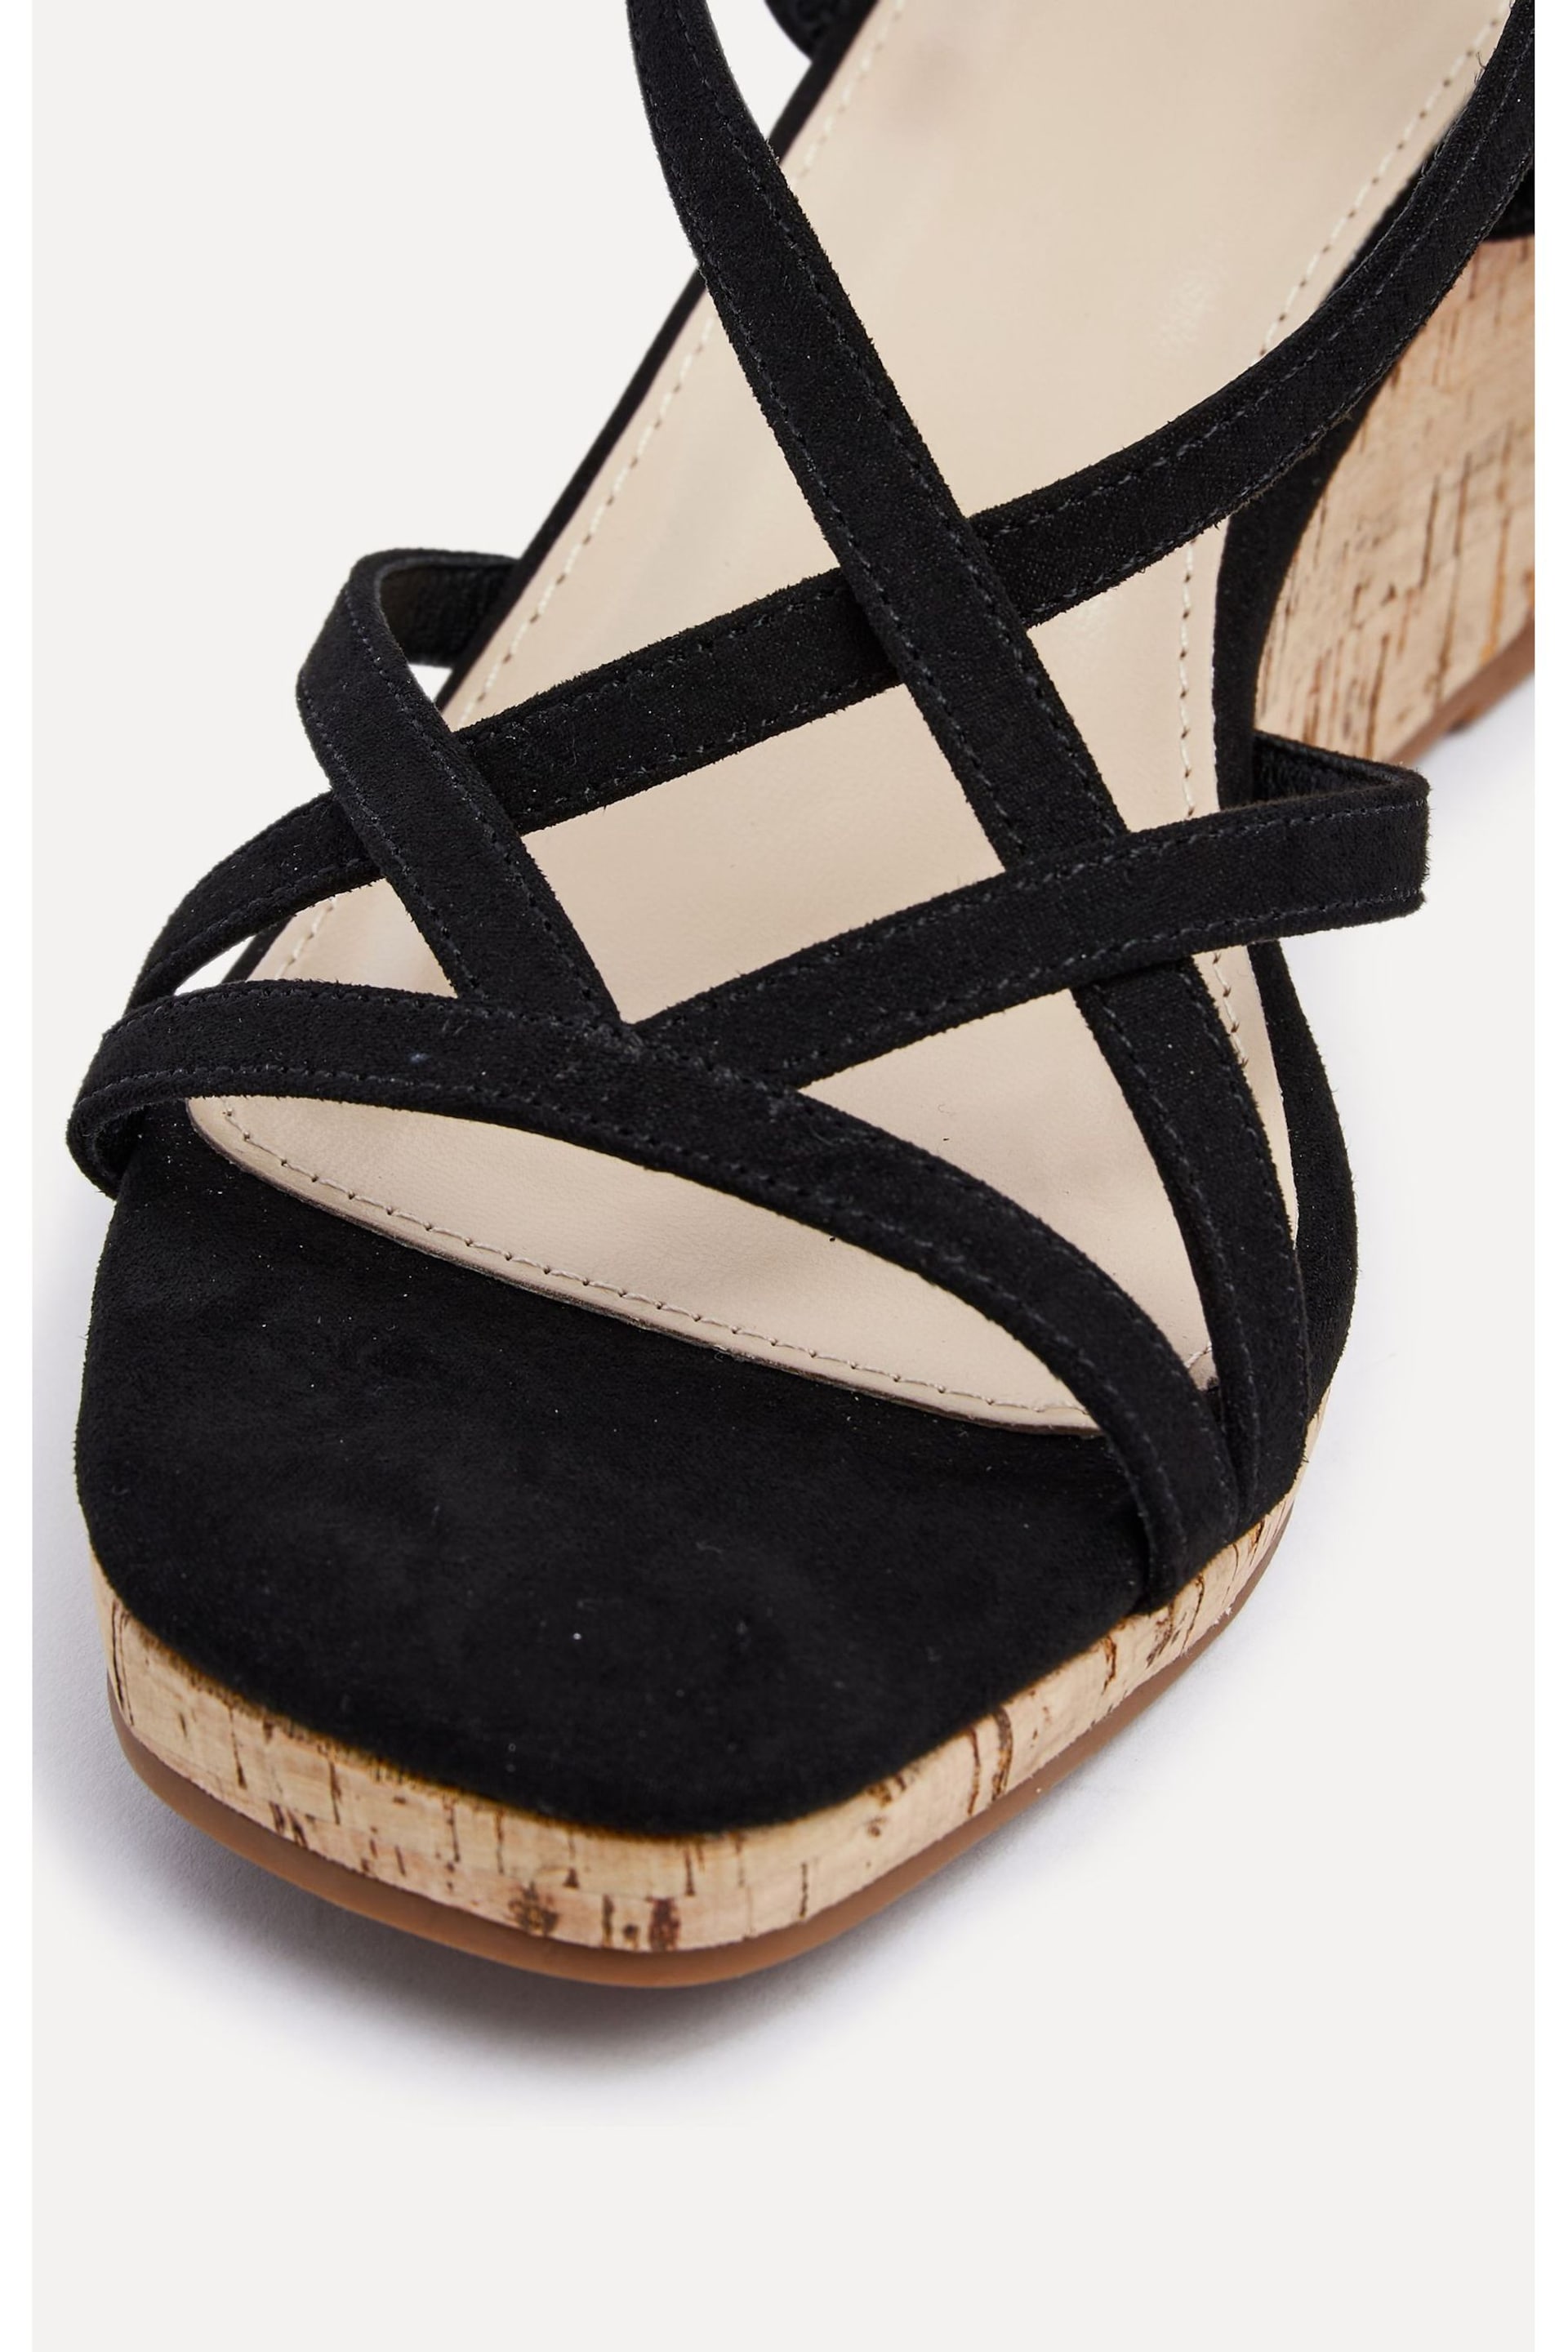 Linzi Black Safiya Strappy Wedge Sandals With Wrap Around Ankle Strap - Image 5 of 5